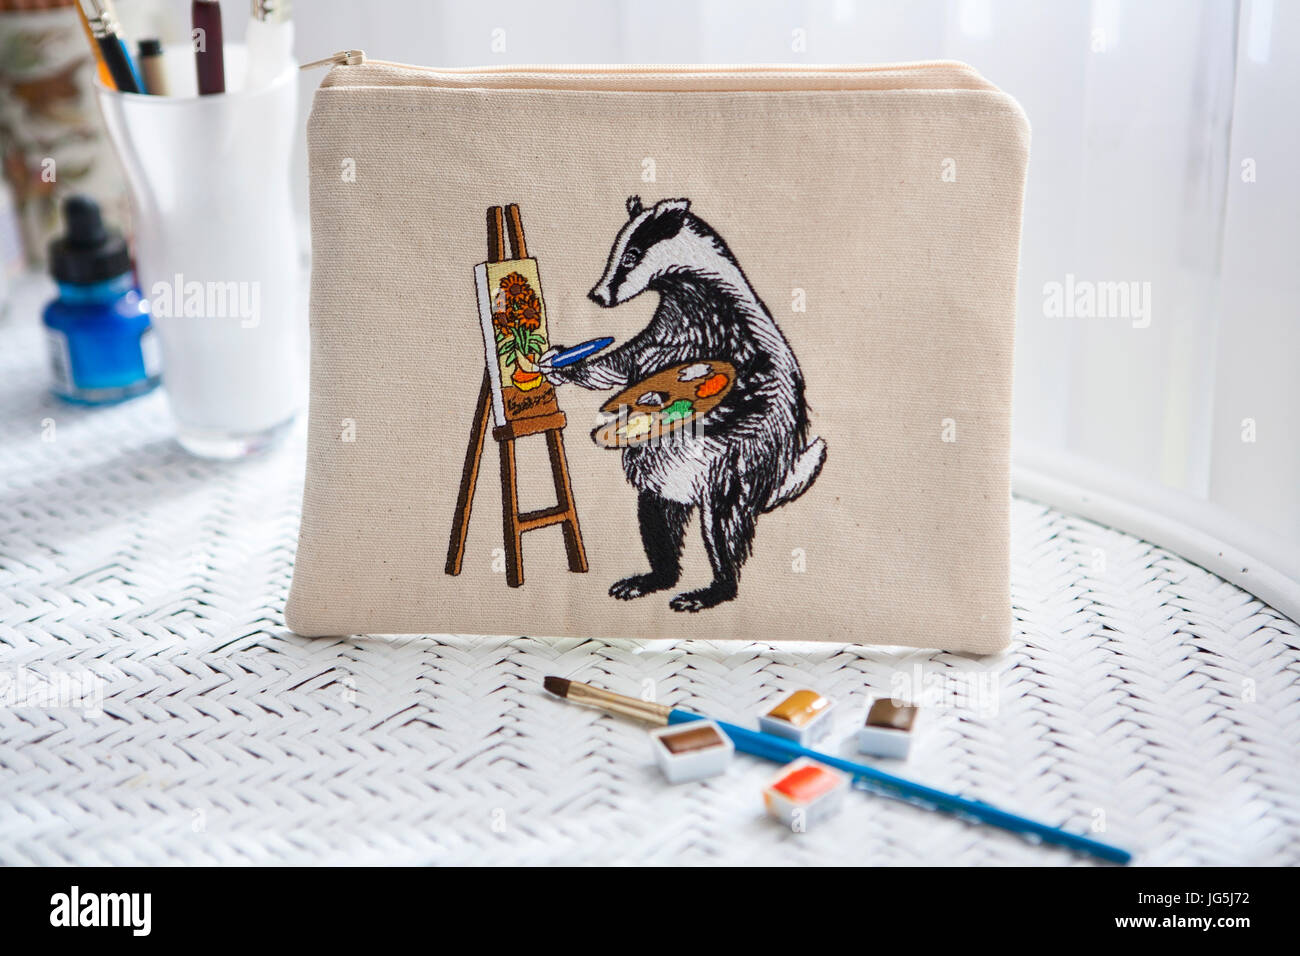 Art materials on desk with zipped pouch depicting an embroidered Badger painting Van Gogh's sunflowers Stock Photo